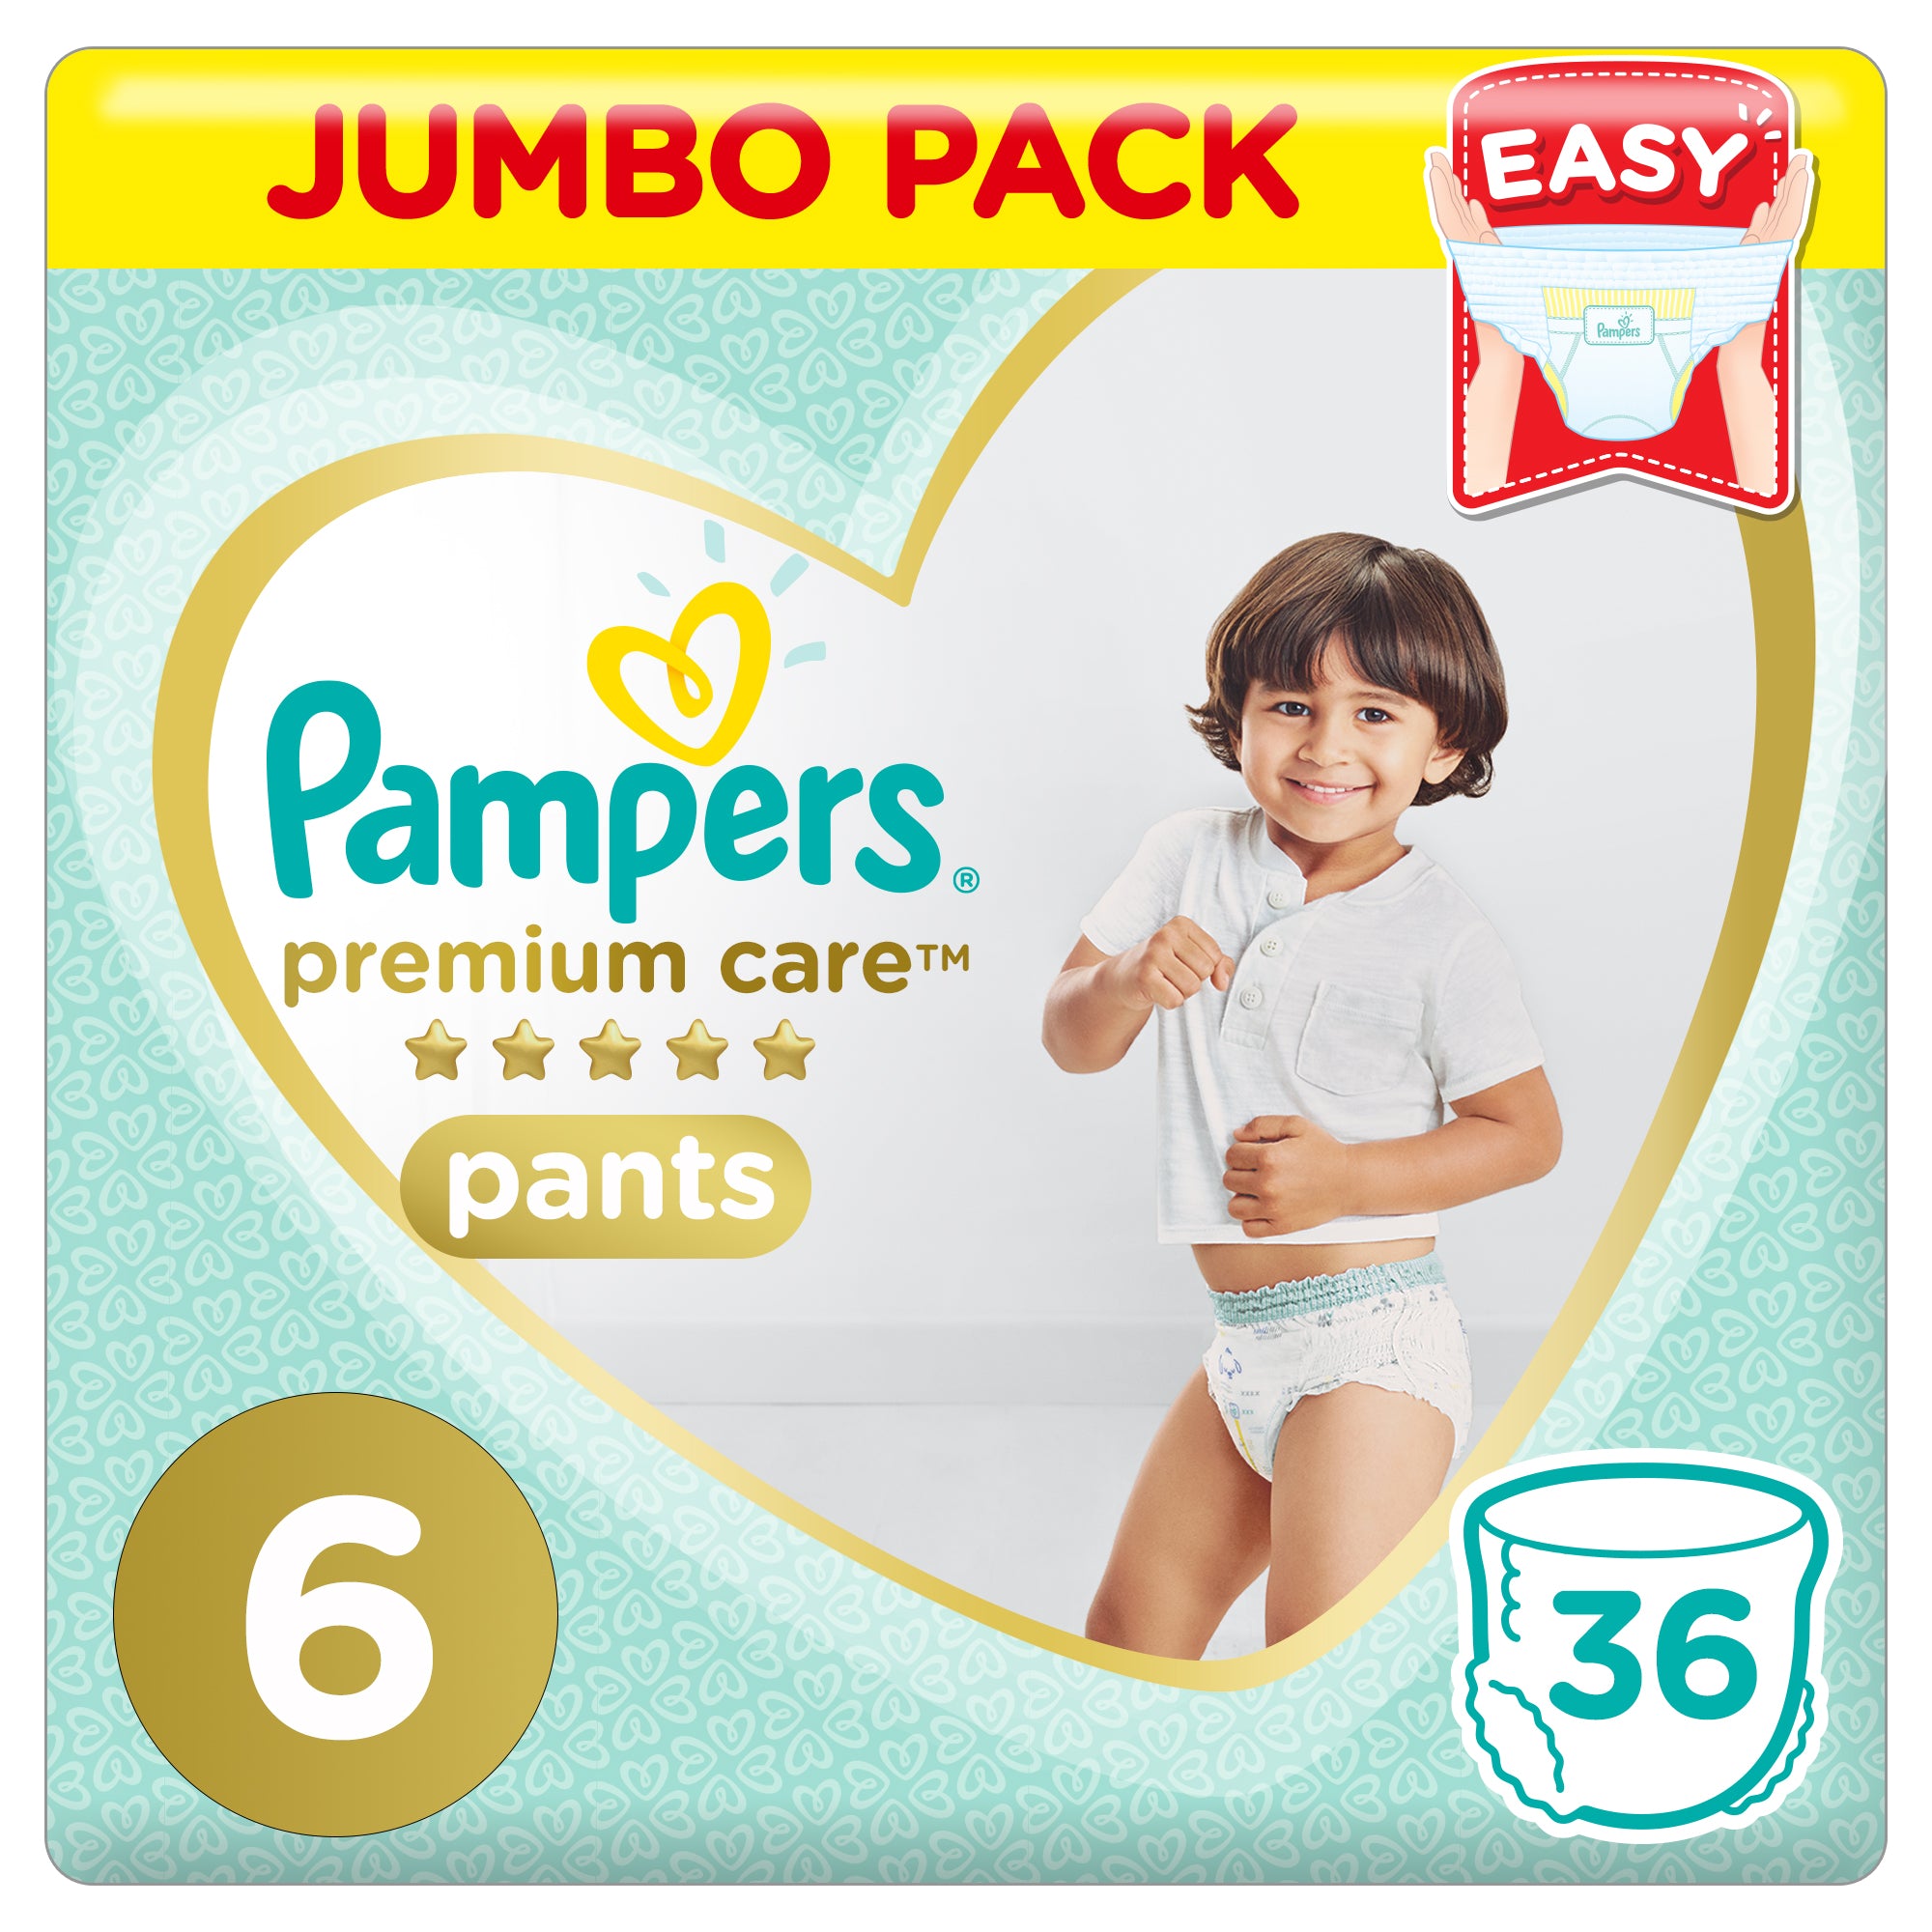 Buy Pampers Premium Care Pants Style Baby Diapers, Medium (M) Size, 162  Count, All-in-1 Diapers with 360 Cottony Softness, 7-12kg Diapers Online at  Low Prices in India - Amazon.in